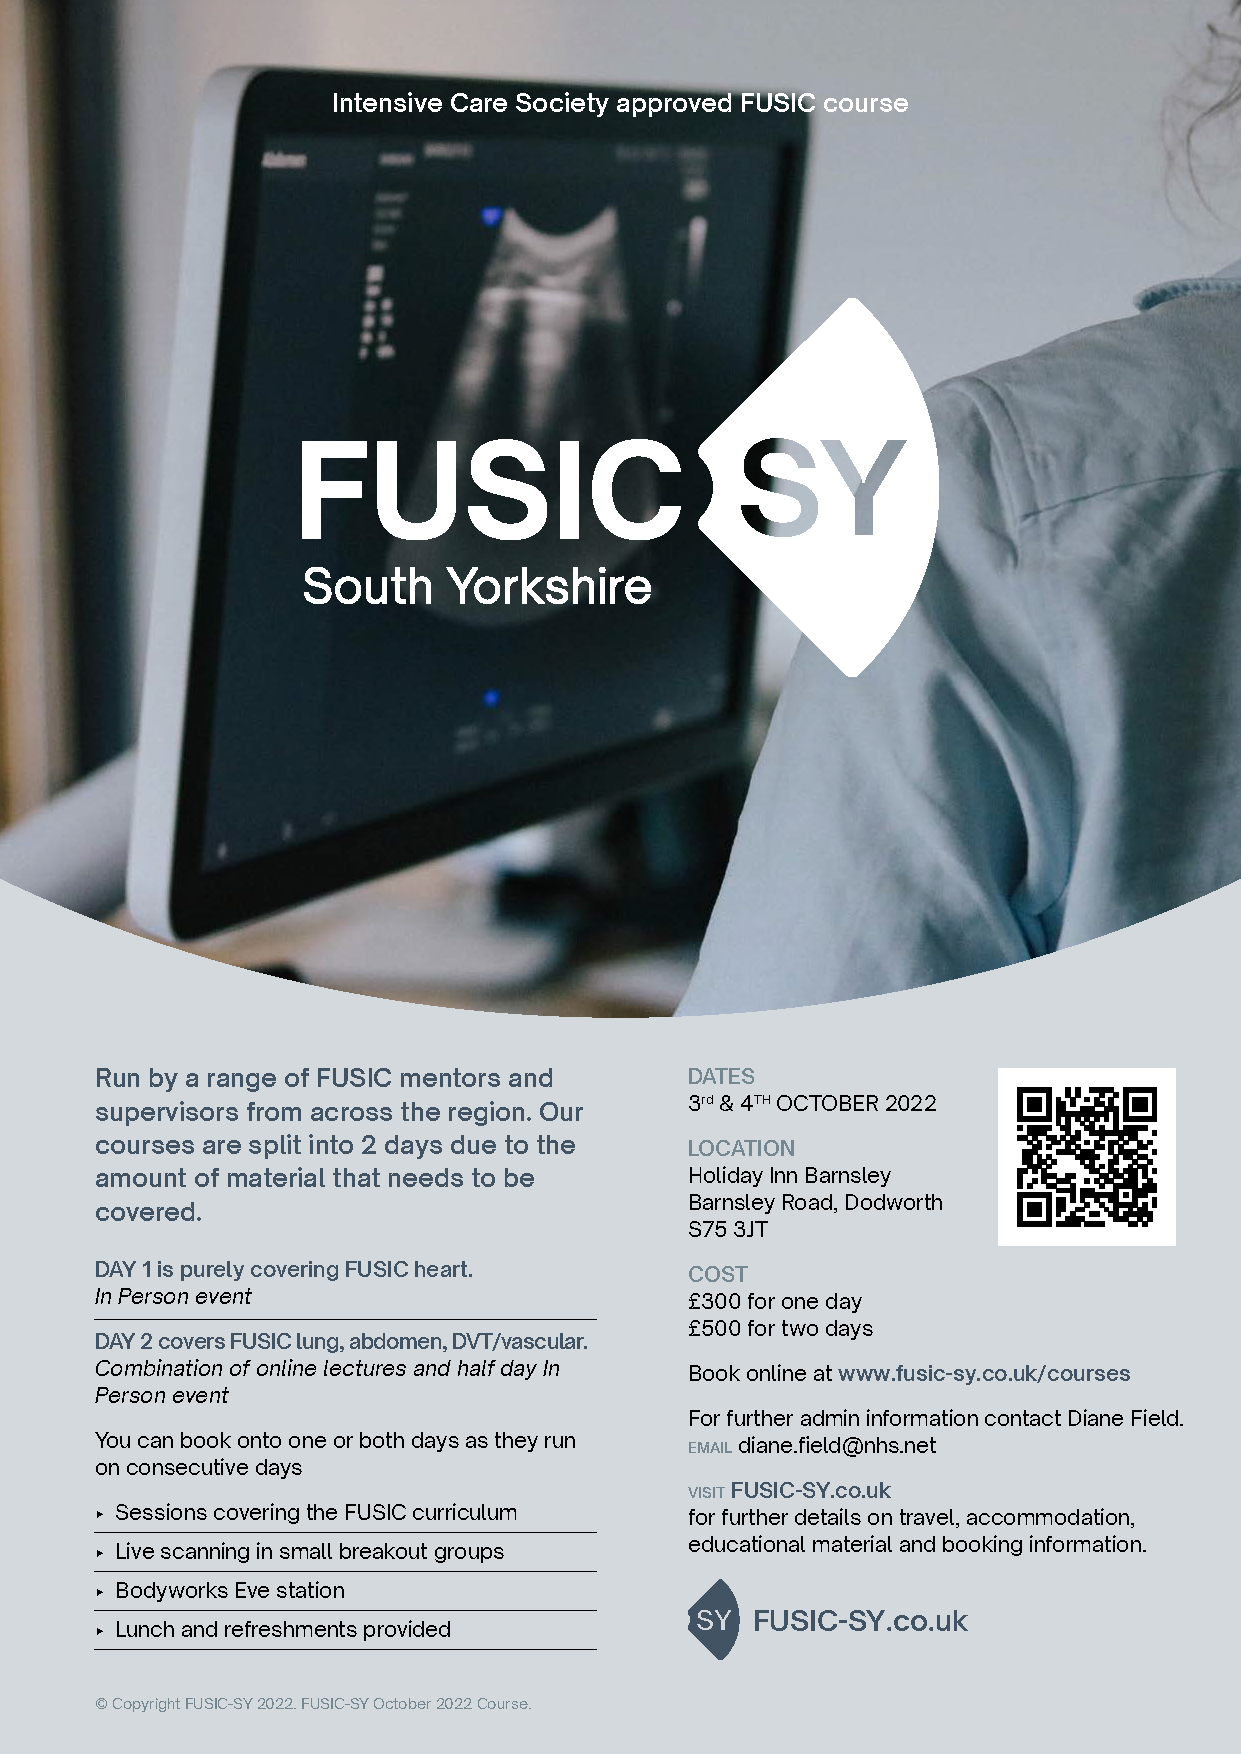 fusic-sy-a4-course-poster-october-2022-v1.png